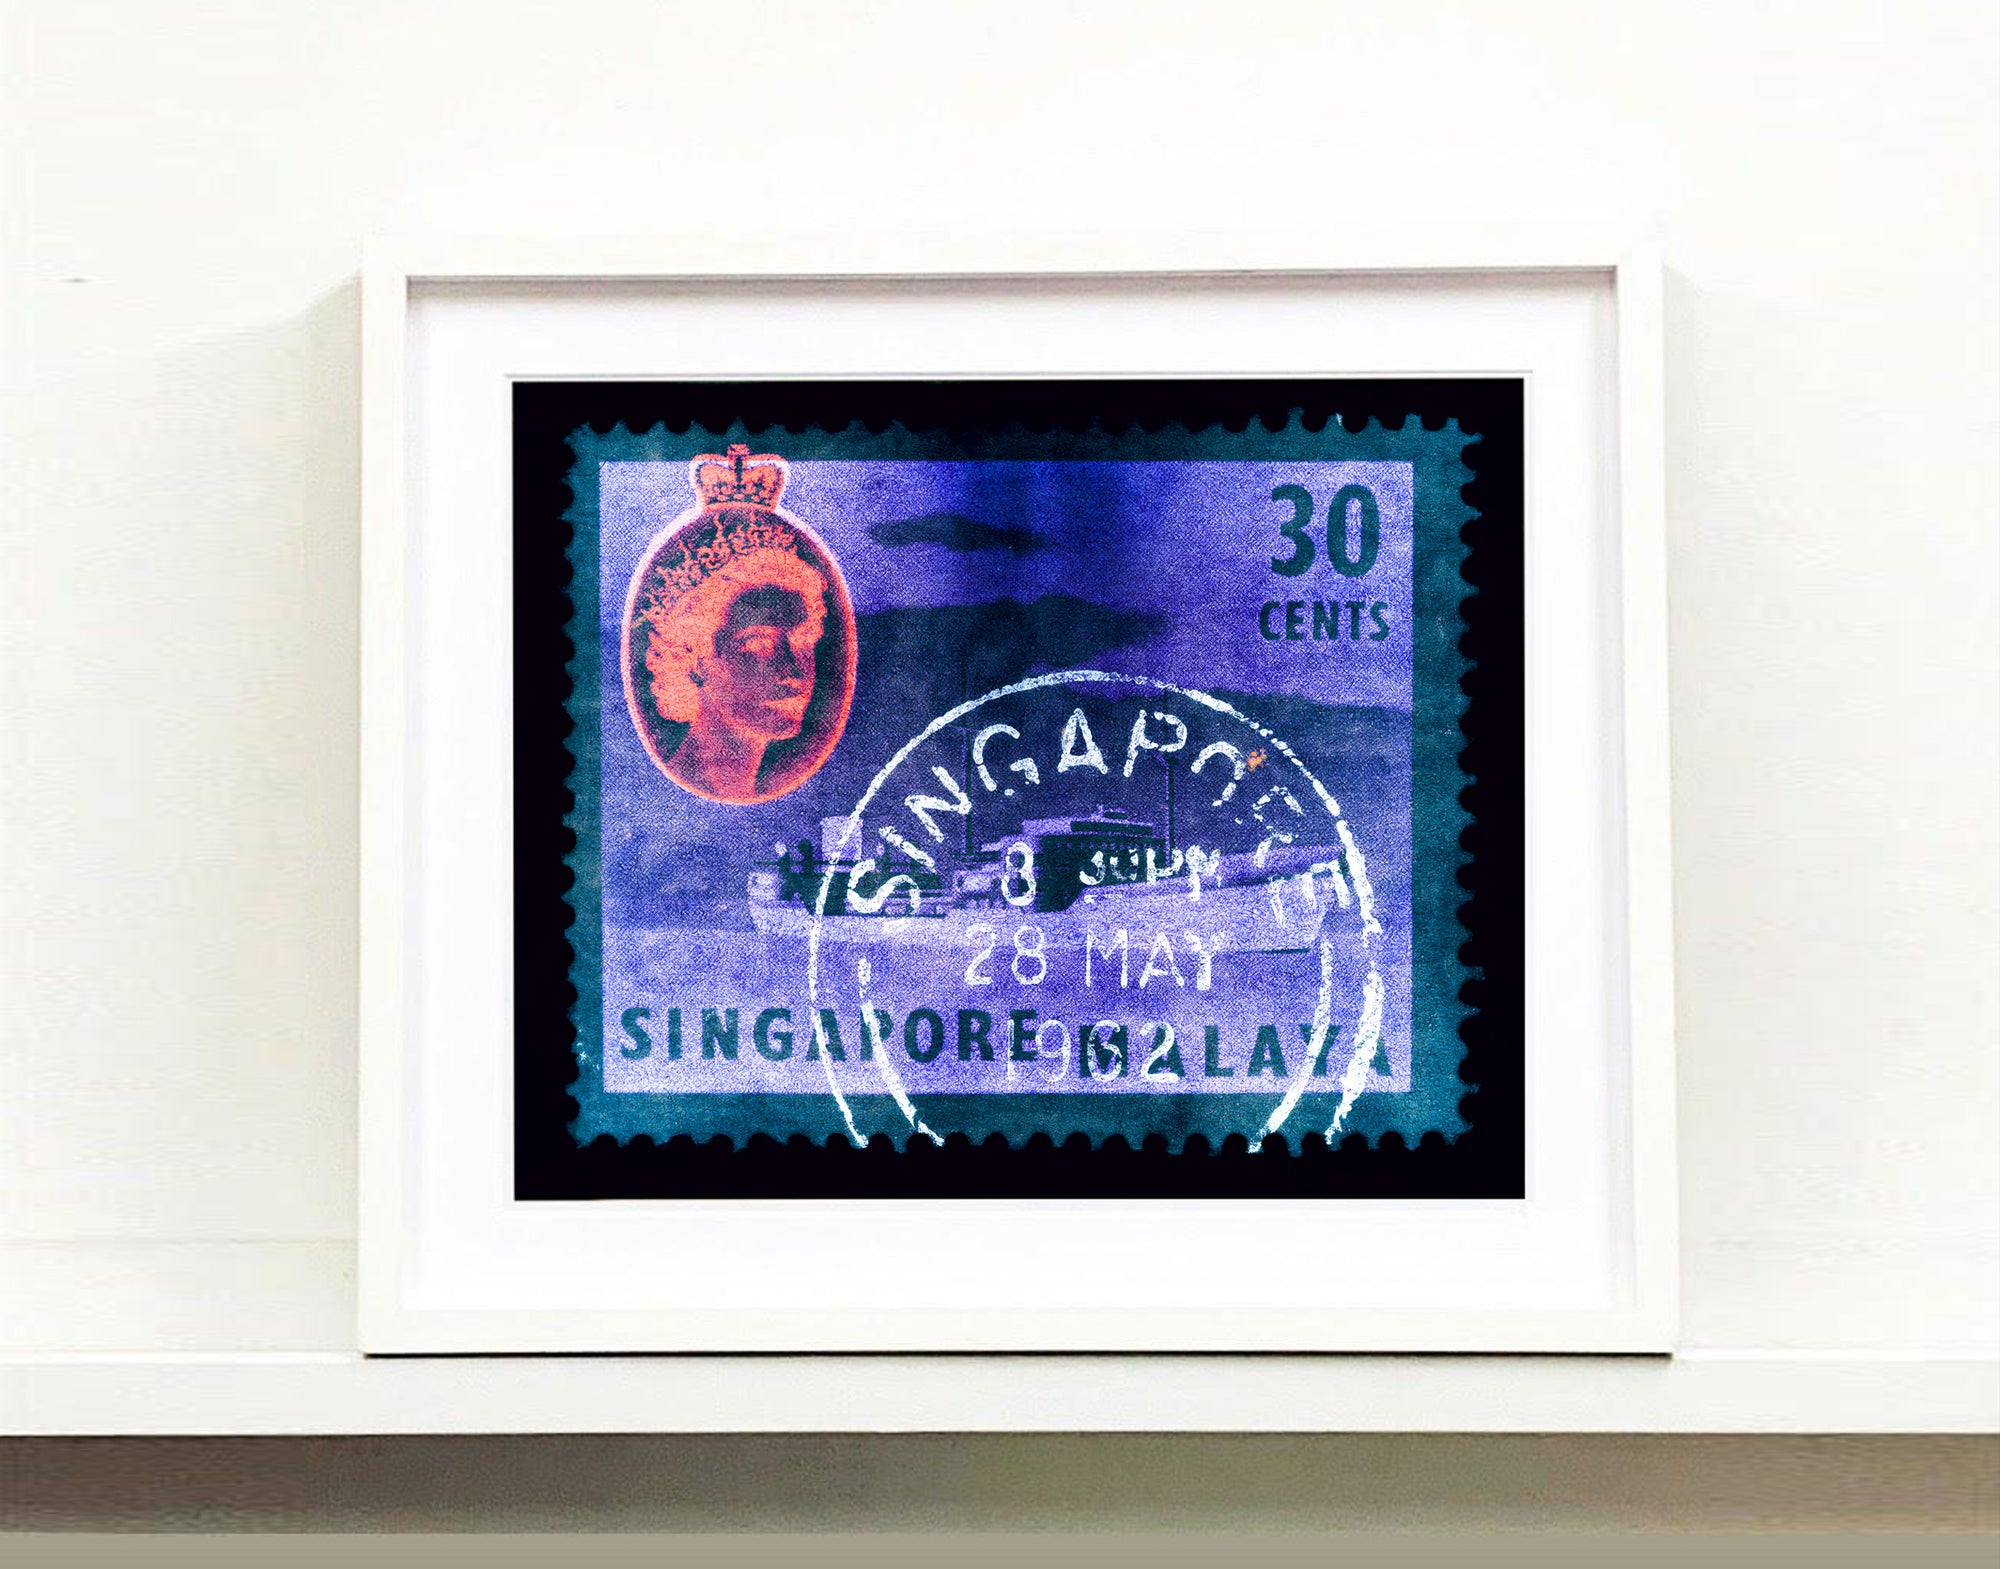 30 cents QEII Oil Tanker (Teal). These historic postage stamps that make up the Heidler & Heeps Stamp Collection, Singapore Series “Postcards from Afar” have been given a twenty-first century pop art lease of life. The fine detailed tapestry of the original small postage stamp has been brought to life, made unique by the franking stamp and Heidler & Heeps specialist darkroom process.